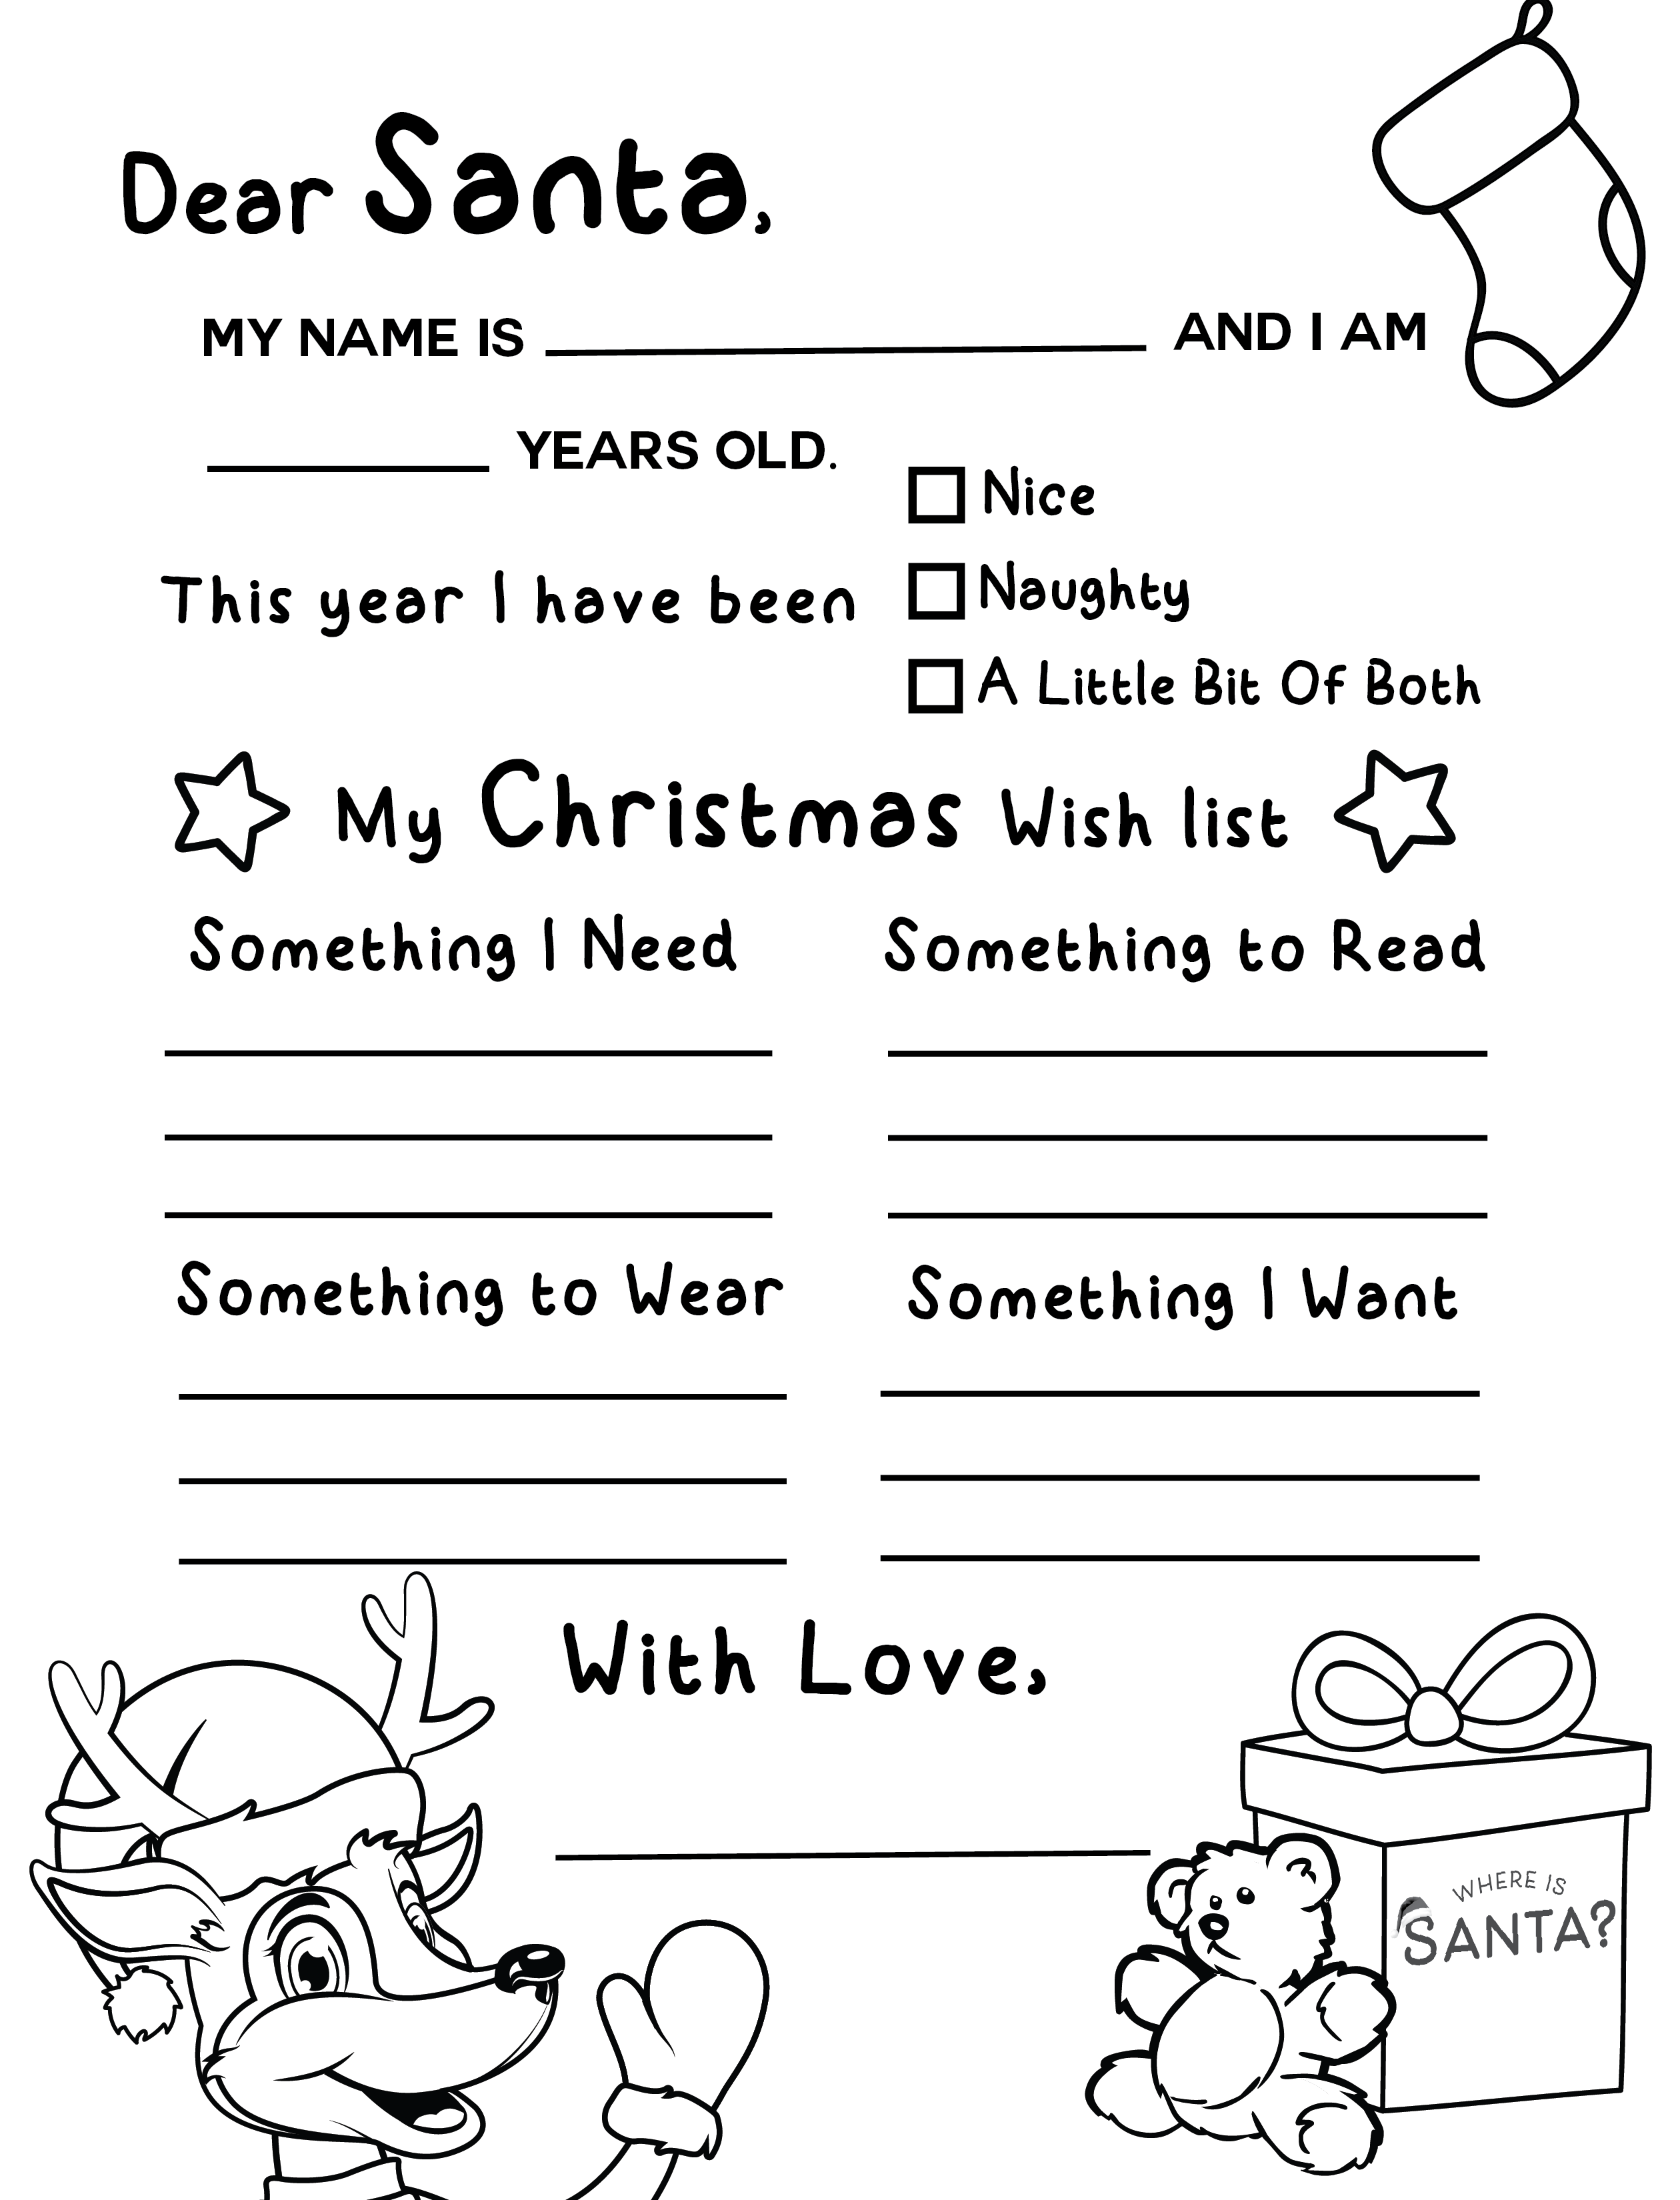 Download your free letter to santa coloring activity